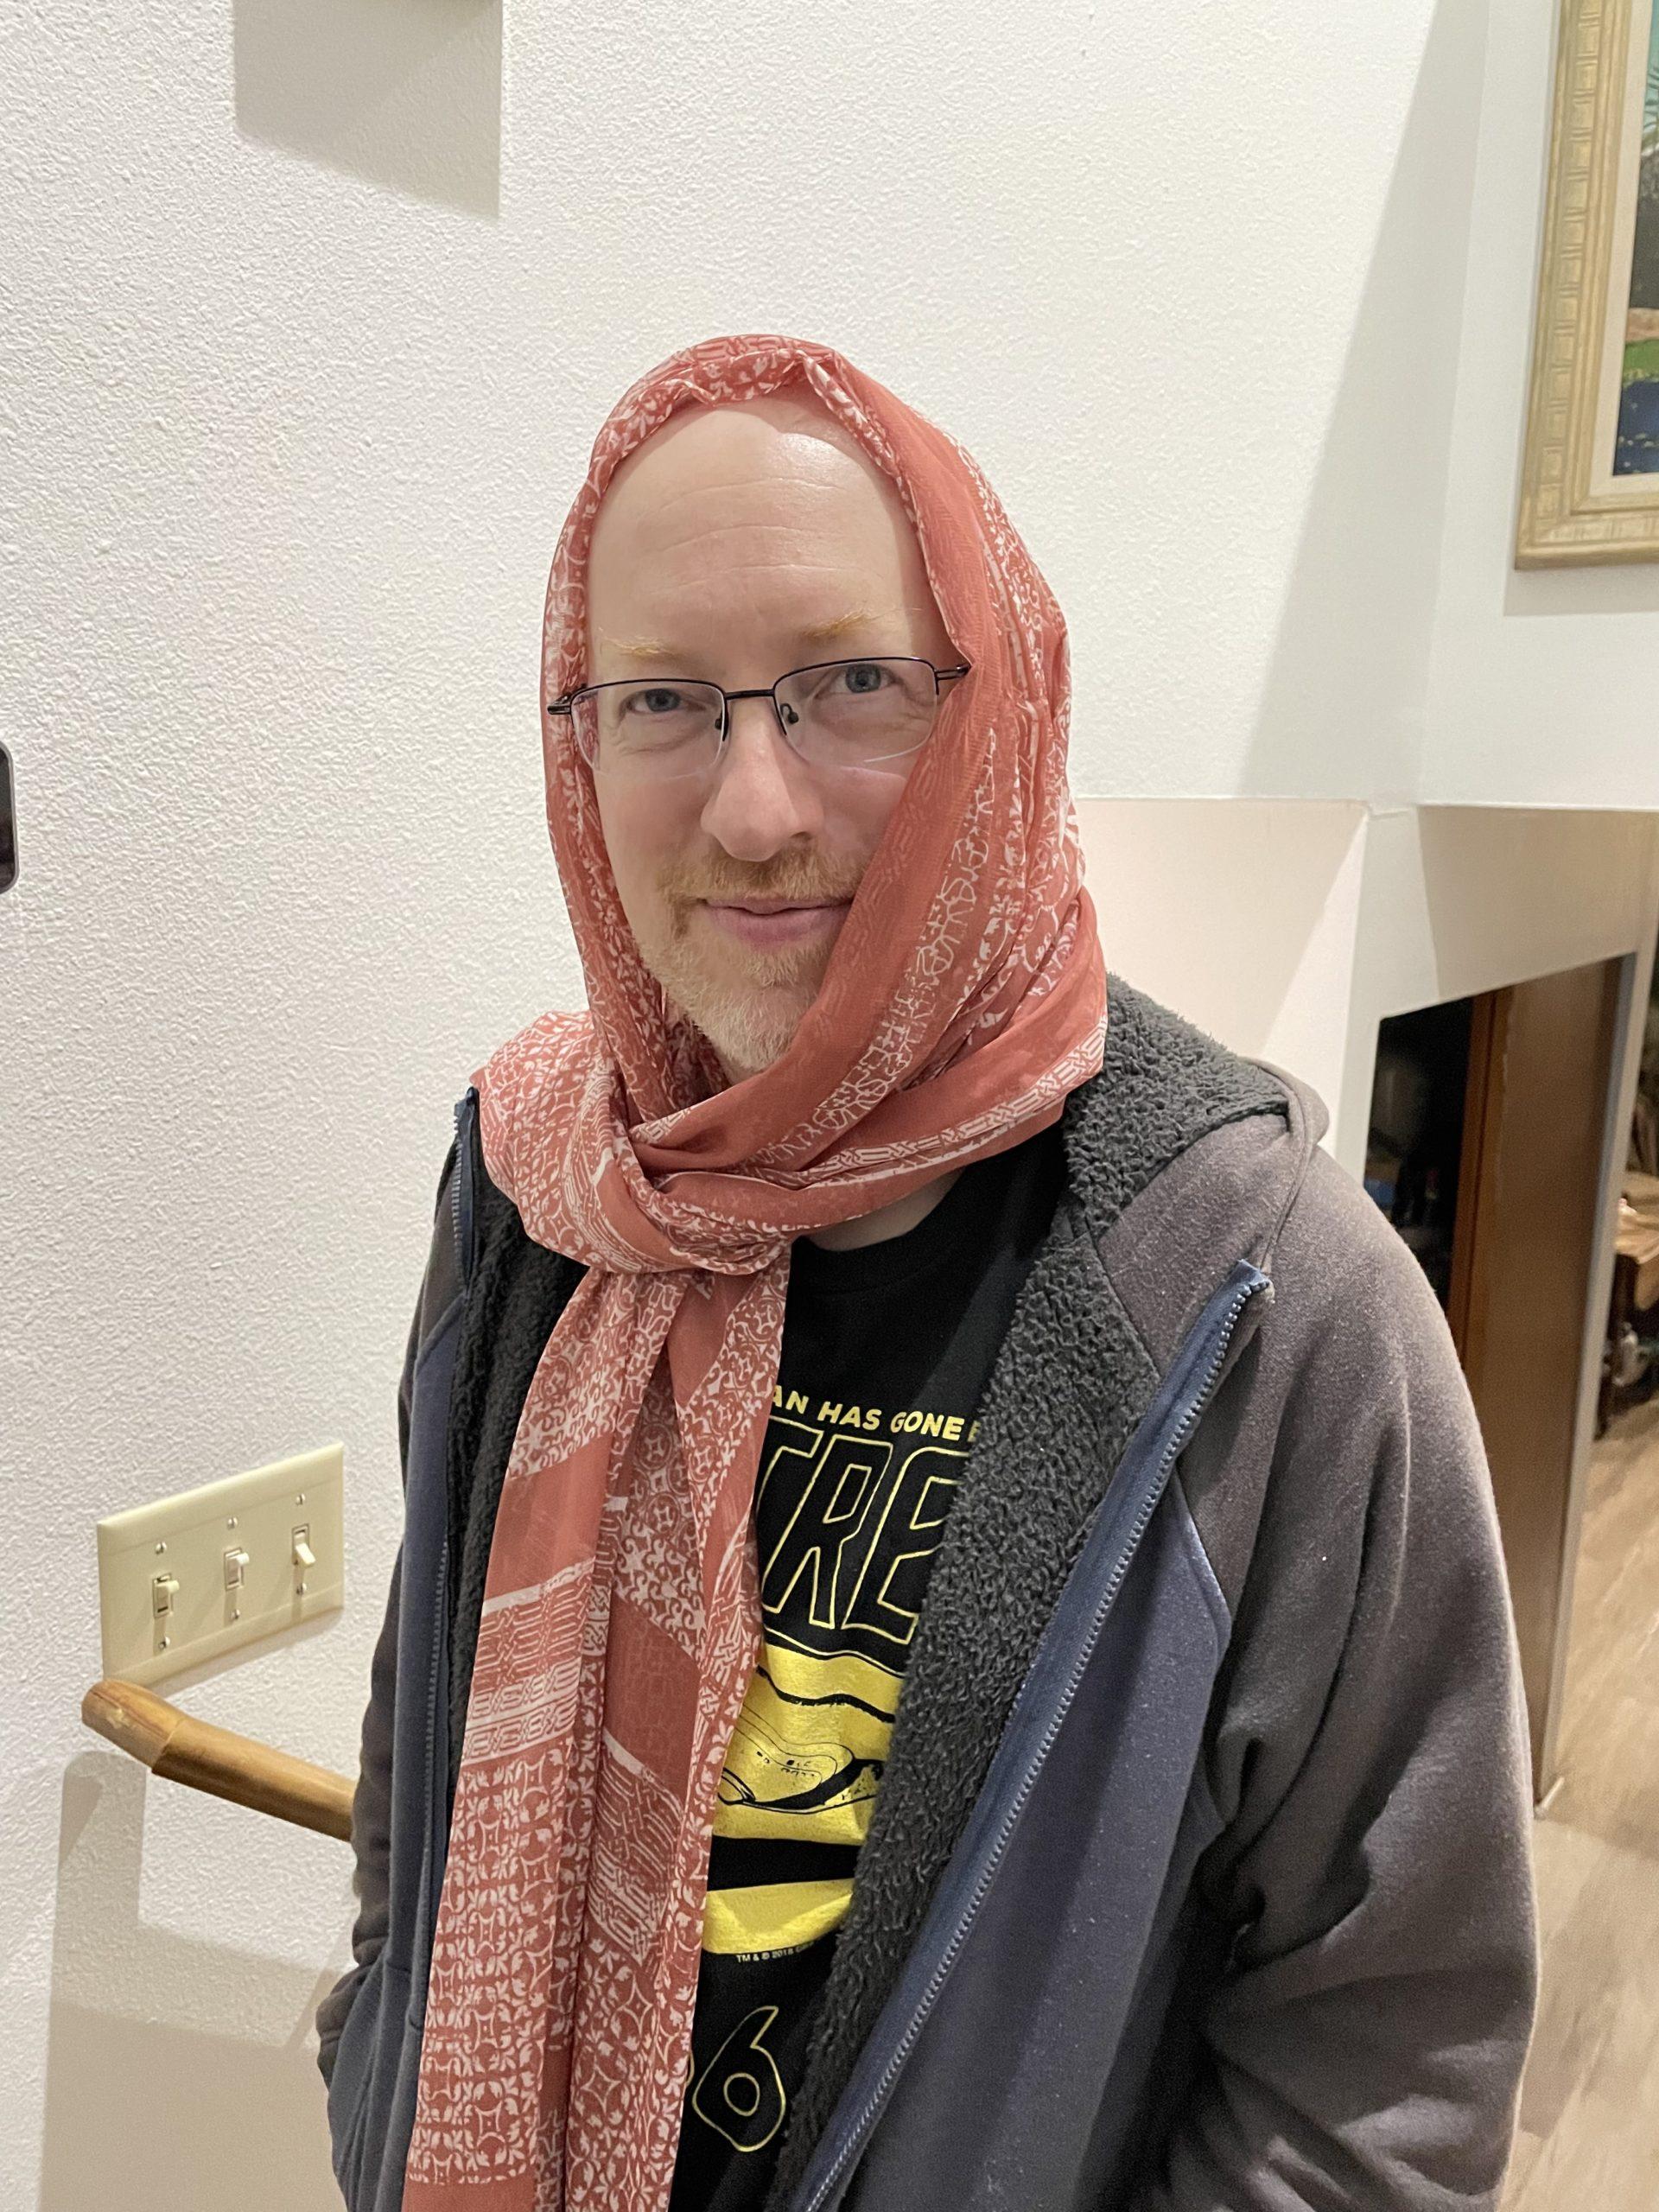 Me wearing a t-shirt and hoodie, with a salmon-colored scarf wrapped around my head.